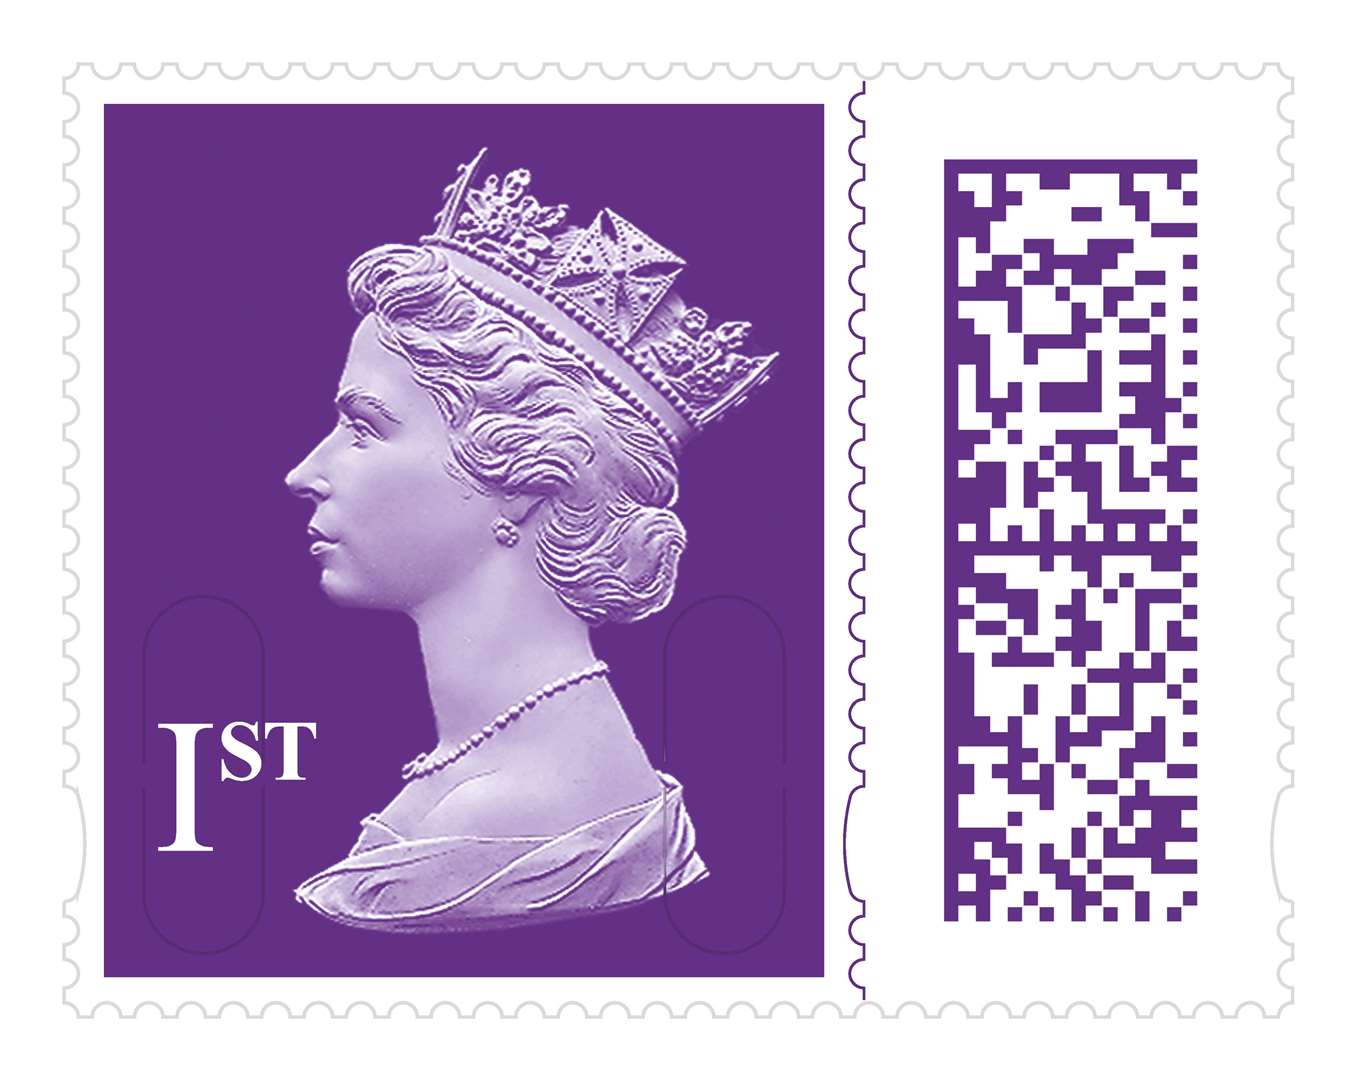 New stamps will carry a digital barcode